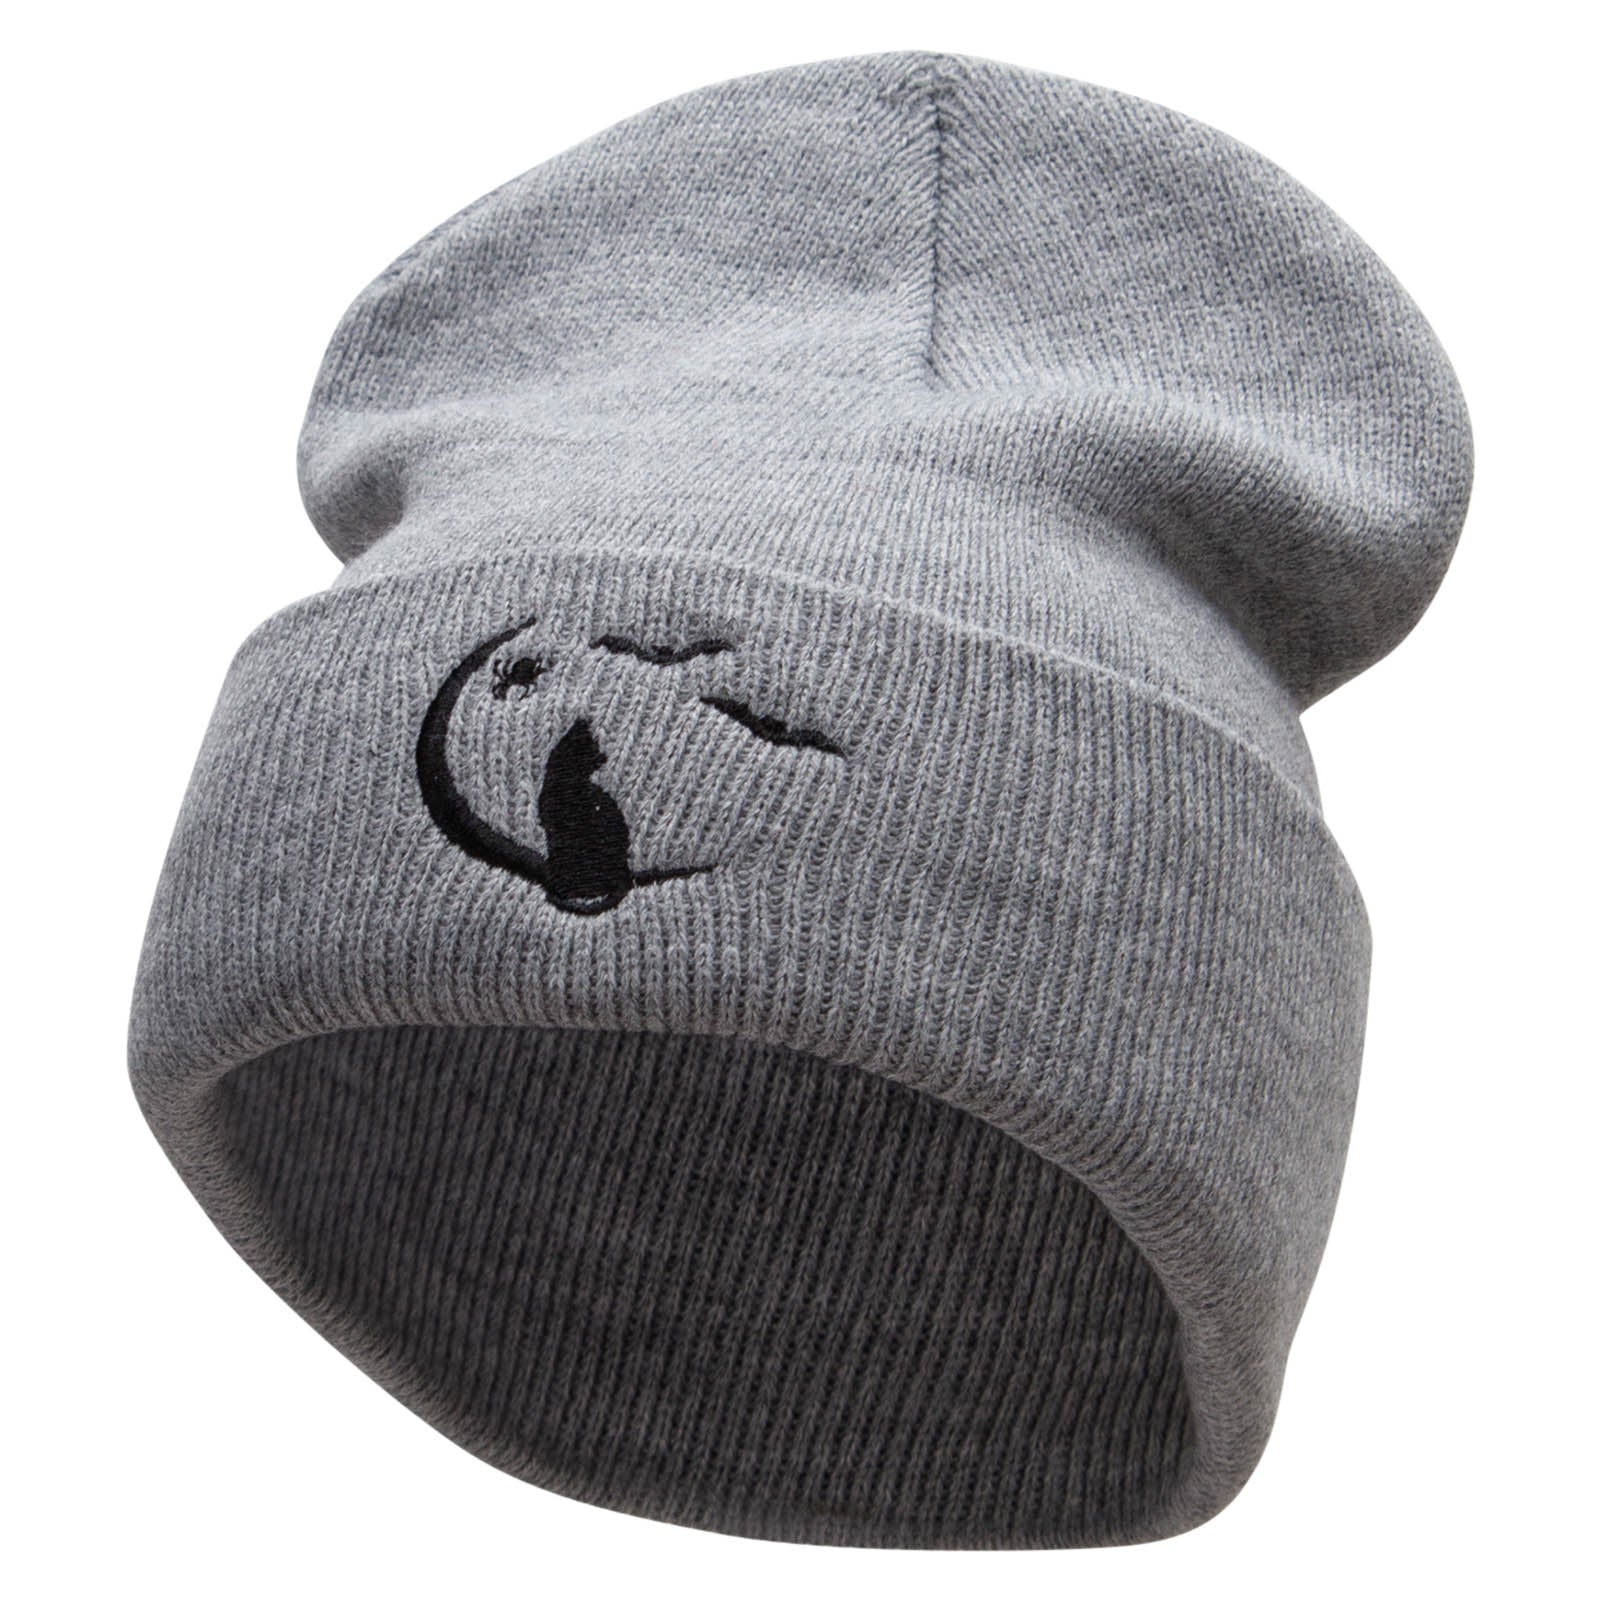 Moonlight Cat Embroidered 12 Inch Long Knitted Beanie - Heather Grey OSFM